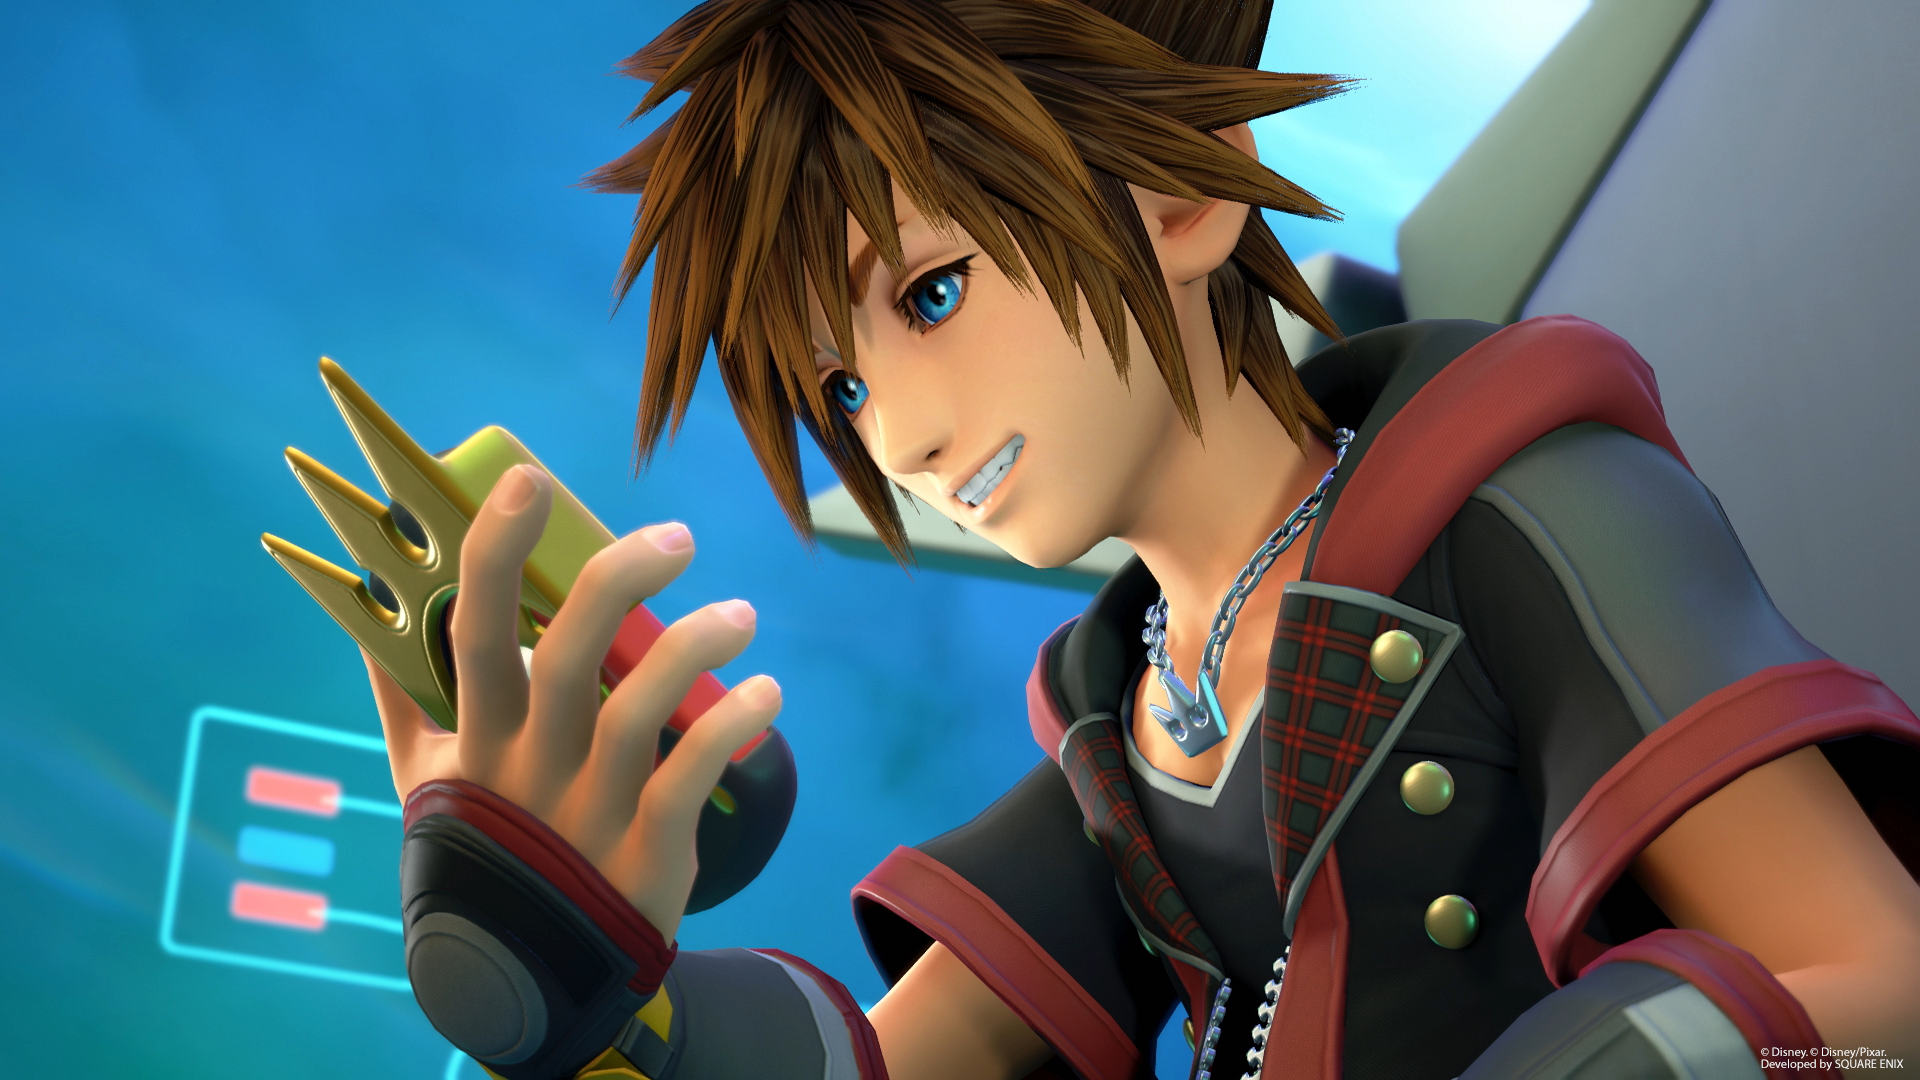 I sadly believe there's proof we aren't getting a Sora amiibo : r/amiibo